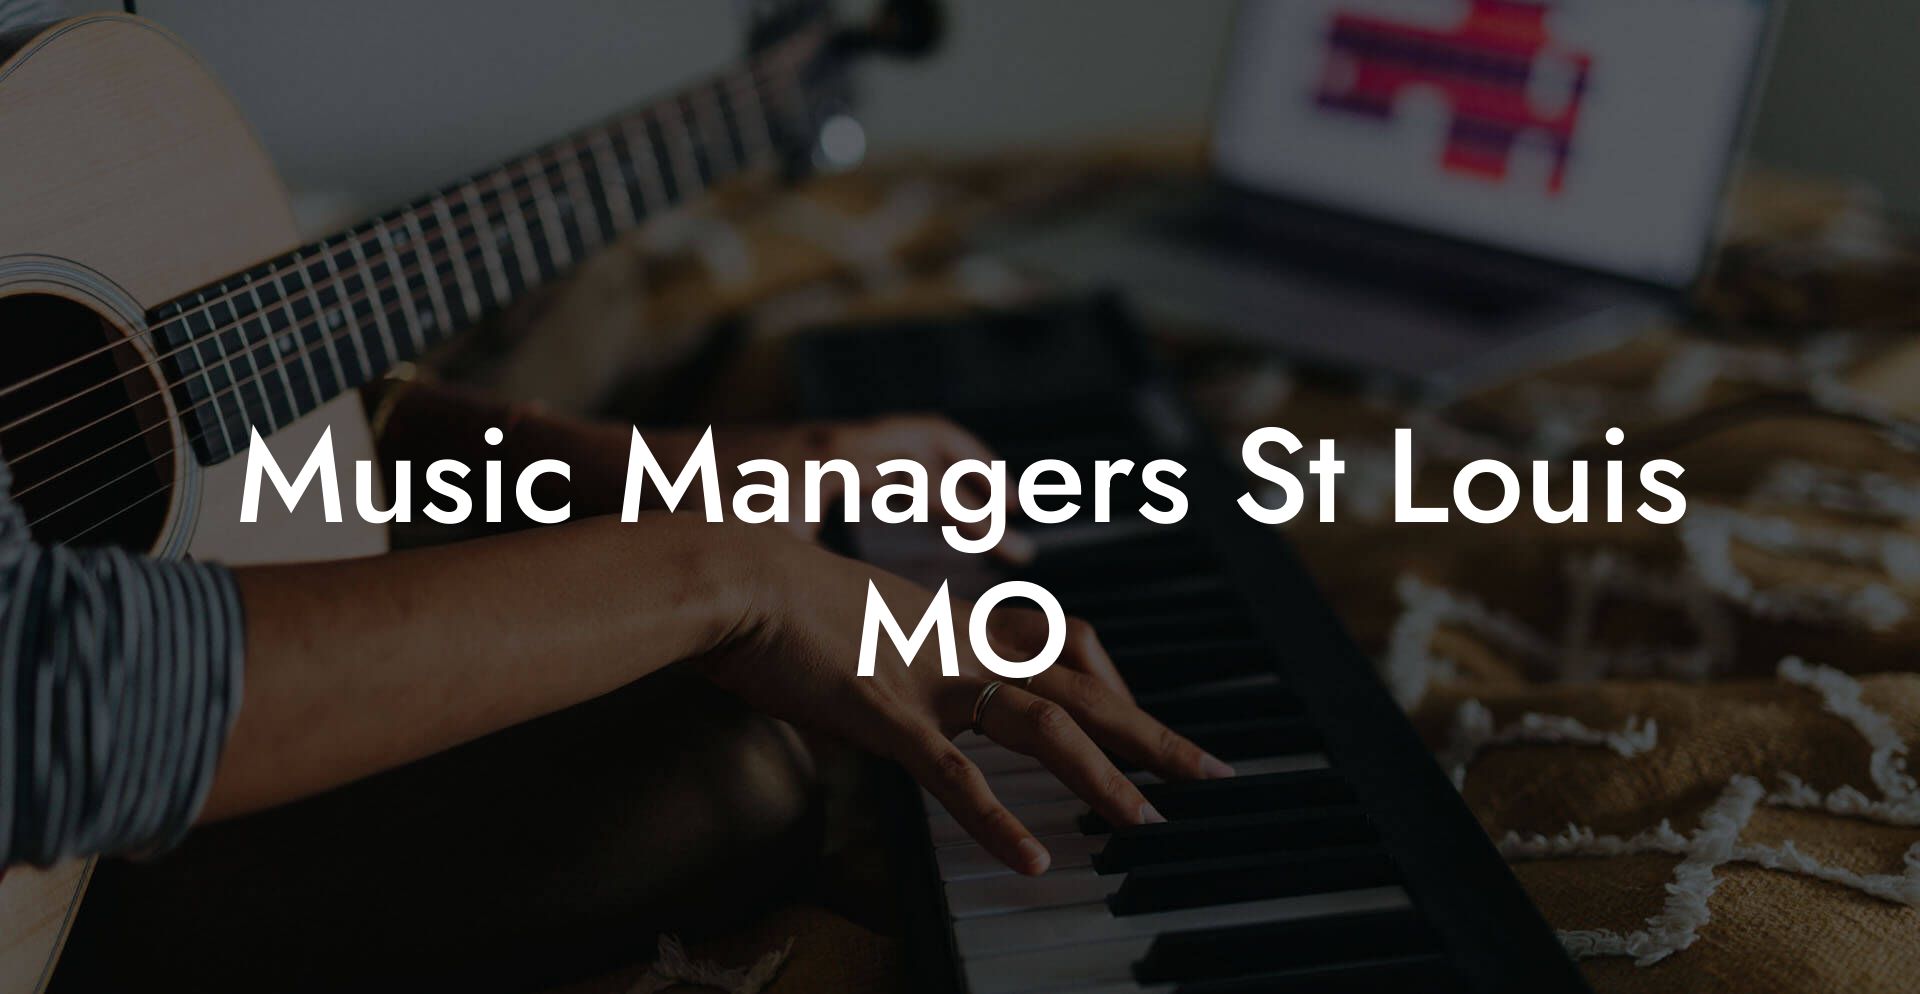 Music Managers St Louis MO